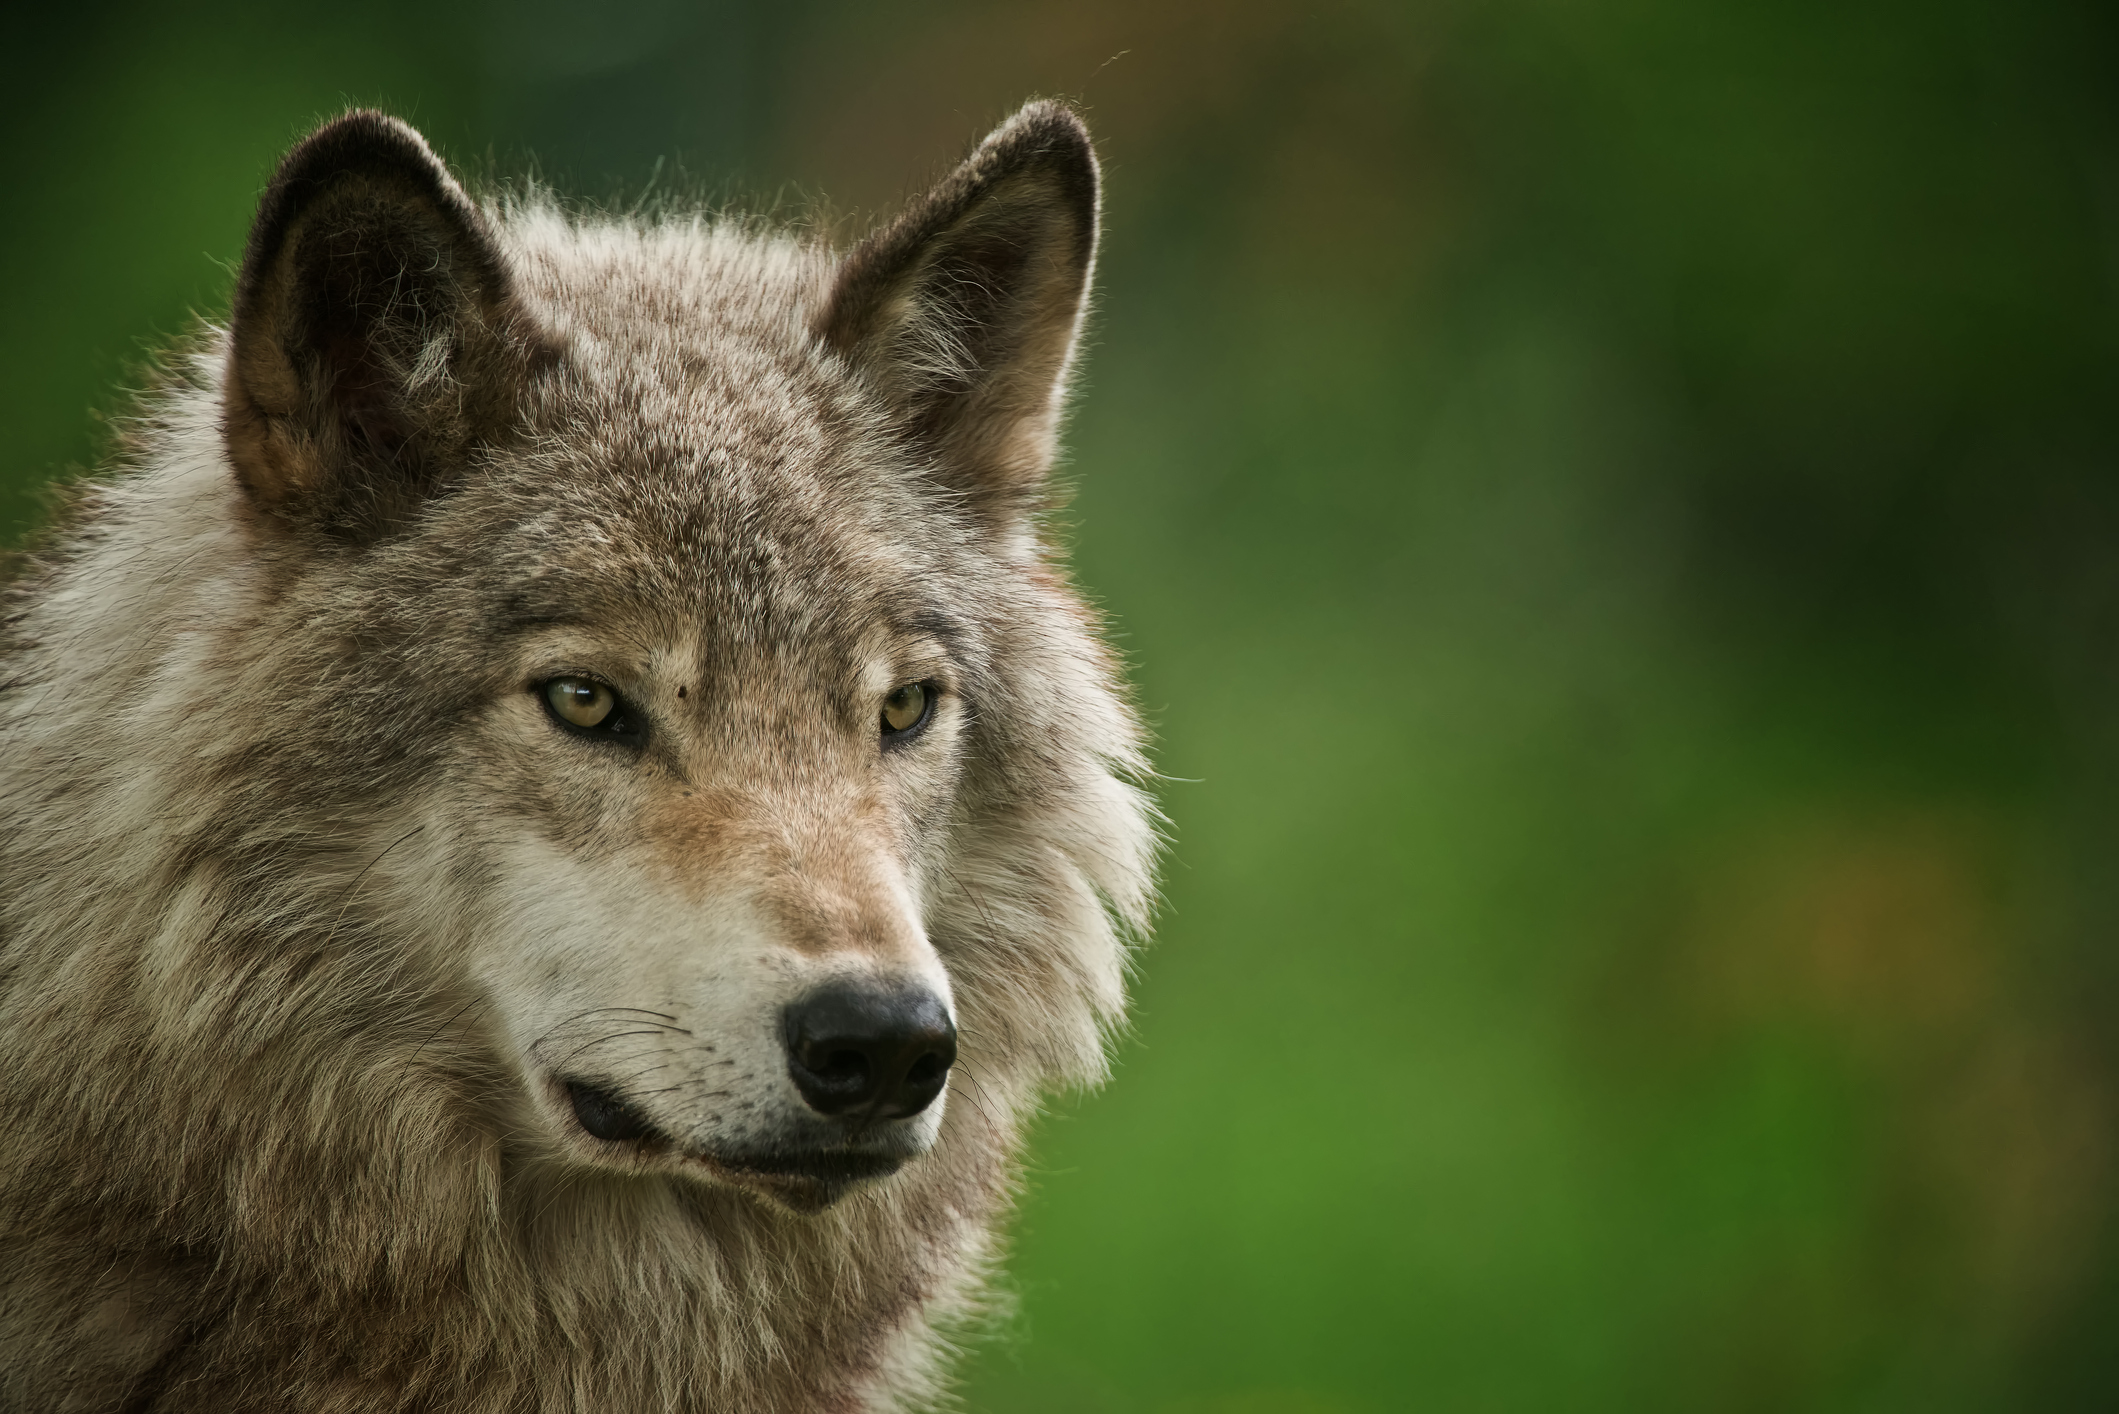 Wolves survived the ice age as a single, global population | Ars Technica